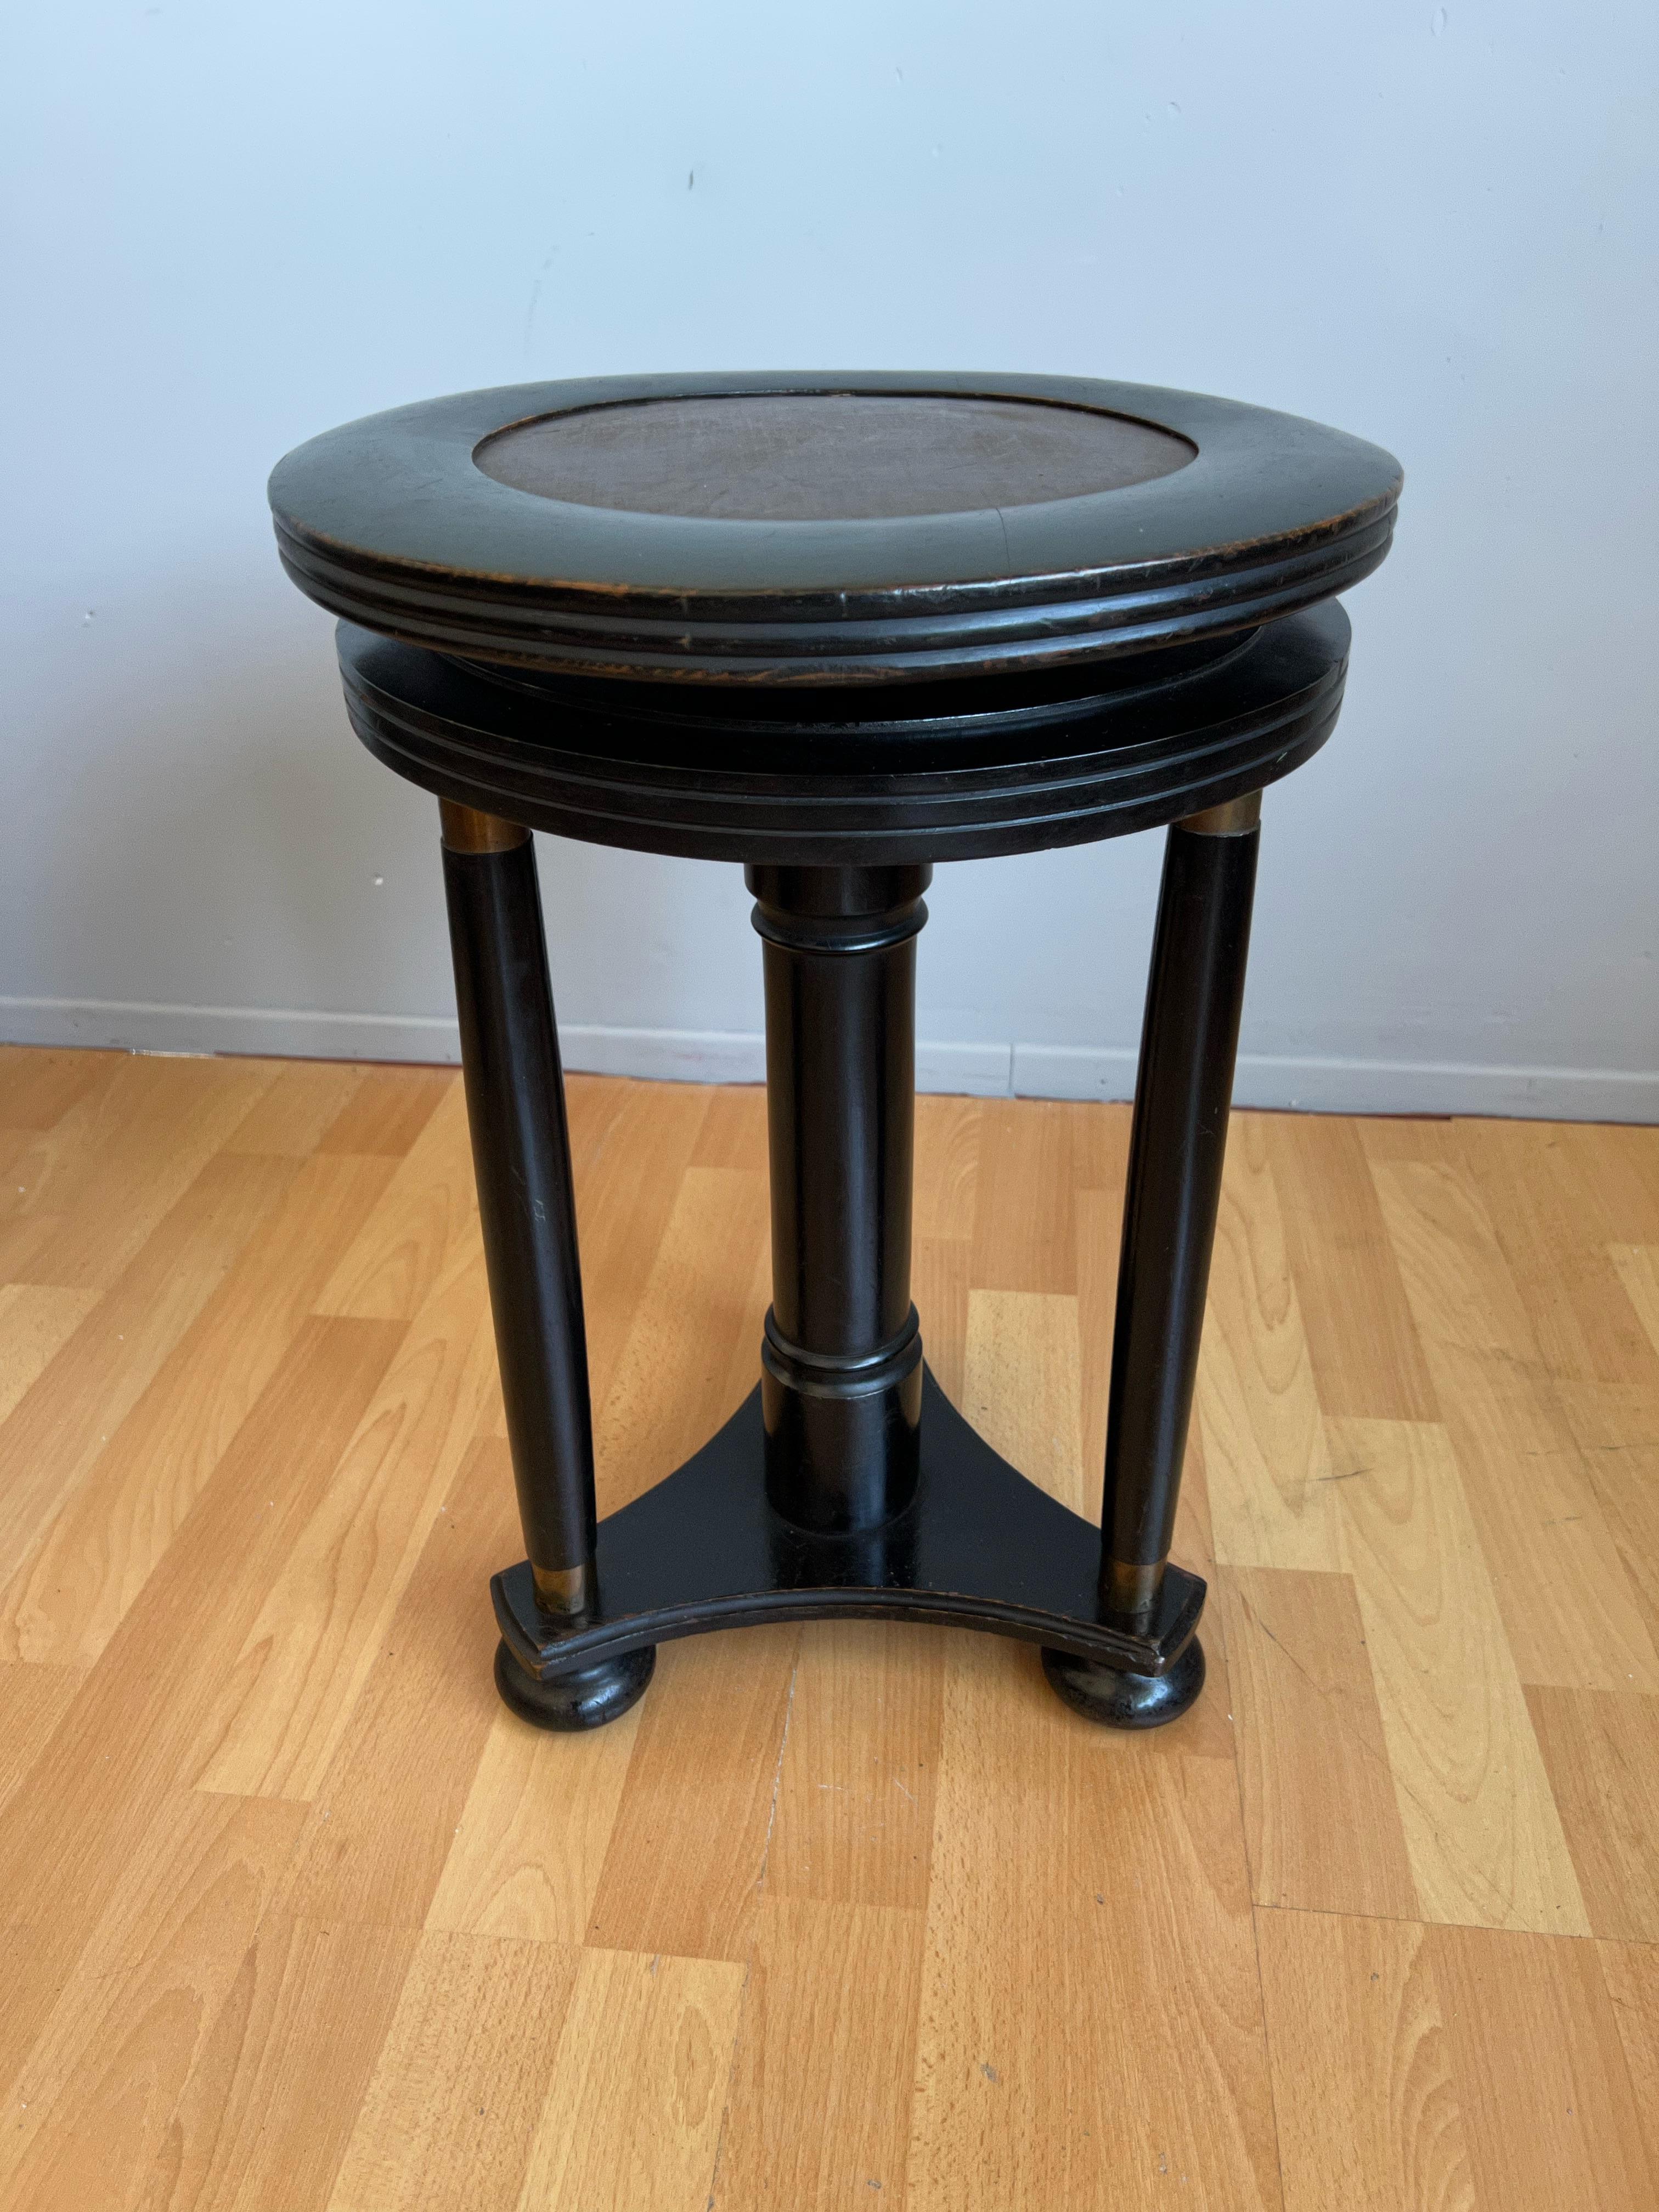 Stylish Blackened Wooden and Brass Art Deco Desk or Piano Swivel Stool, ca 1900 For Sale 11